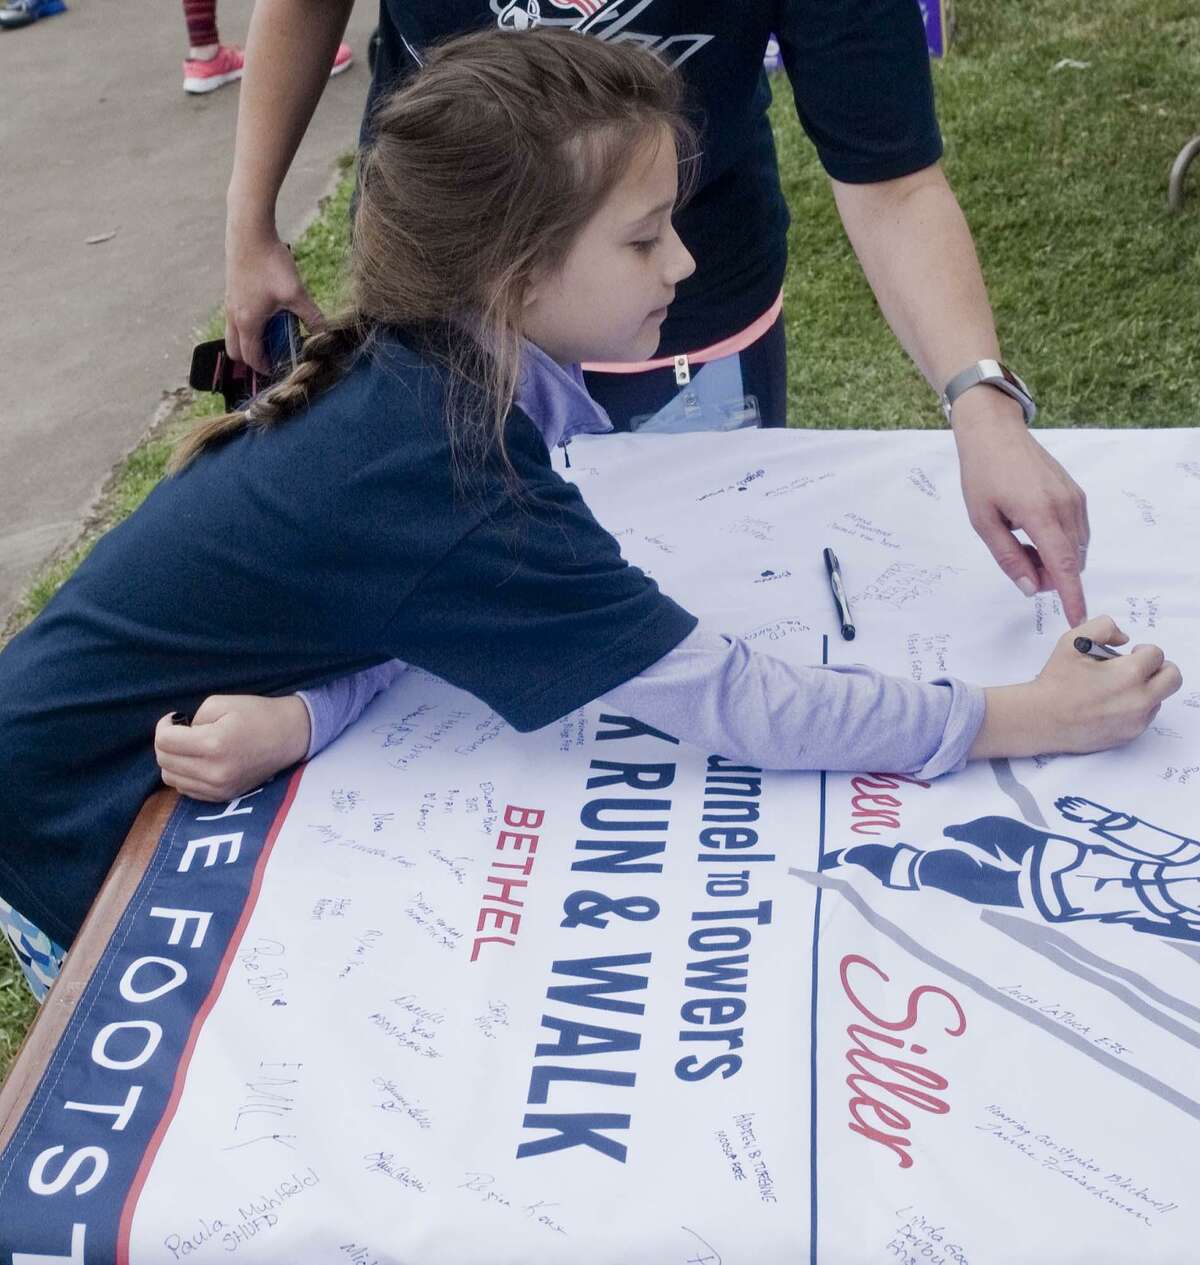 Ava Keil, 7 of Newtown, signs the Tunnel to Towers banner at Bethel High School at the inaugural 5K race honoring firefighters killed in 9/11. Sunday, June 24, 2018